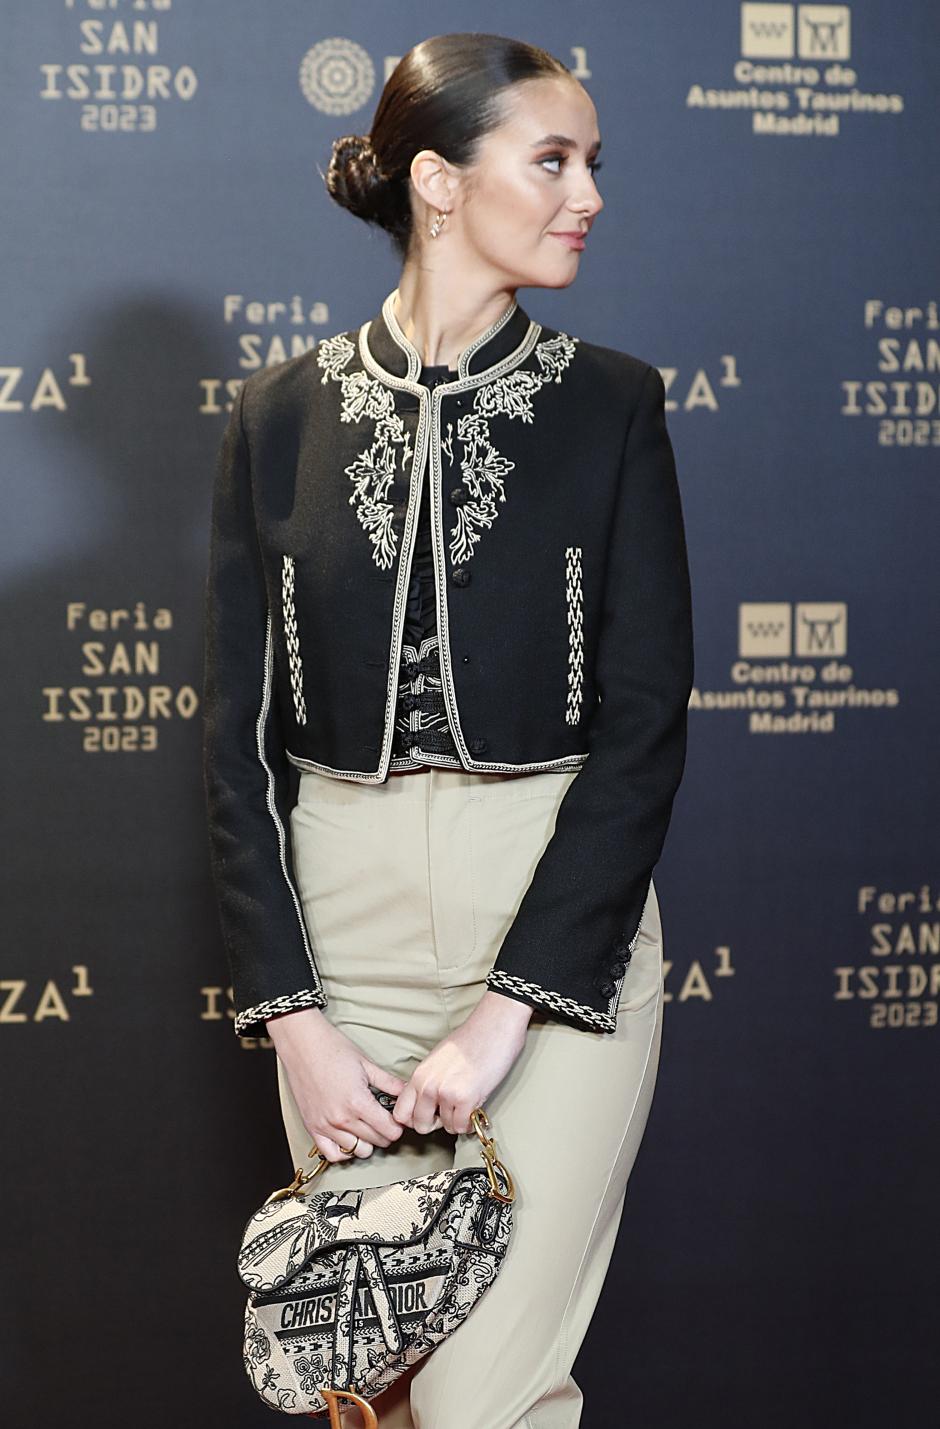 Victoria Federica de Marichalar during the Gala of presentation of the Cartels of the"Feria de San Isidro 2023 in Madrid on Wednesday, 1 February 2023